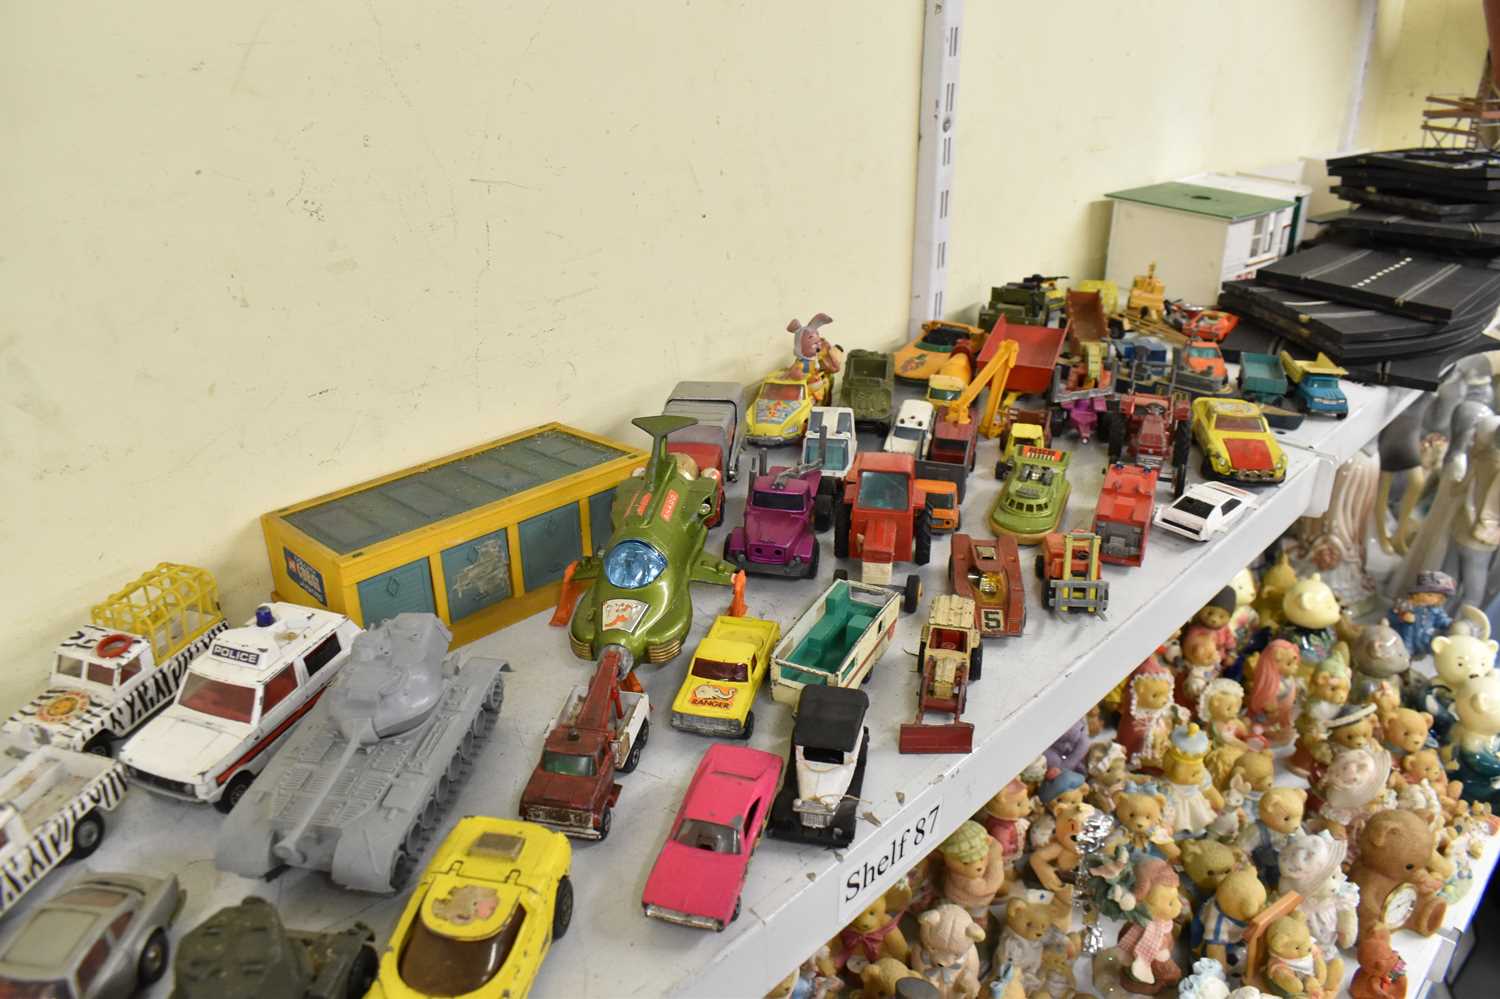 A quantity of Matchbox and Corgi model vehicles and a small quantity of Scalextric track and model - Image 3 of 3